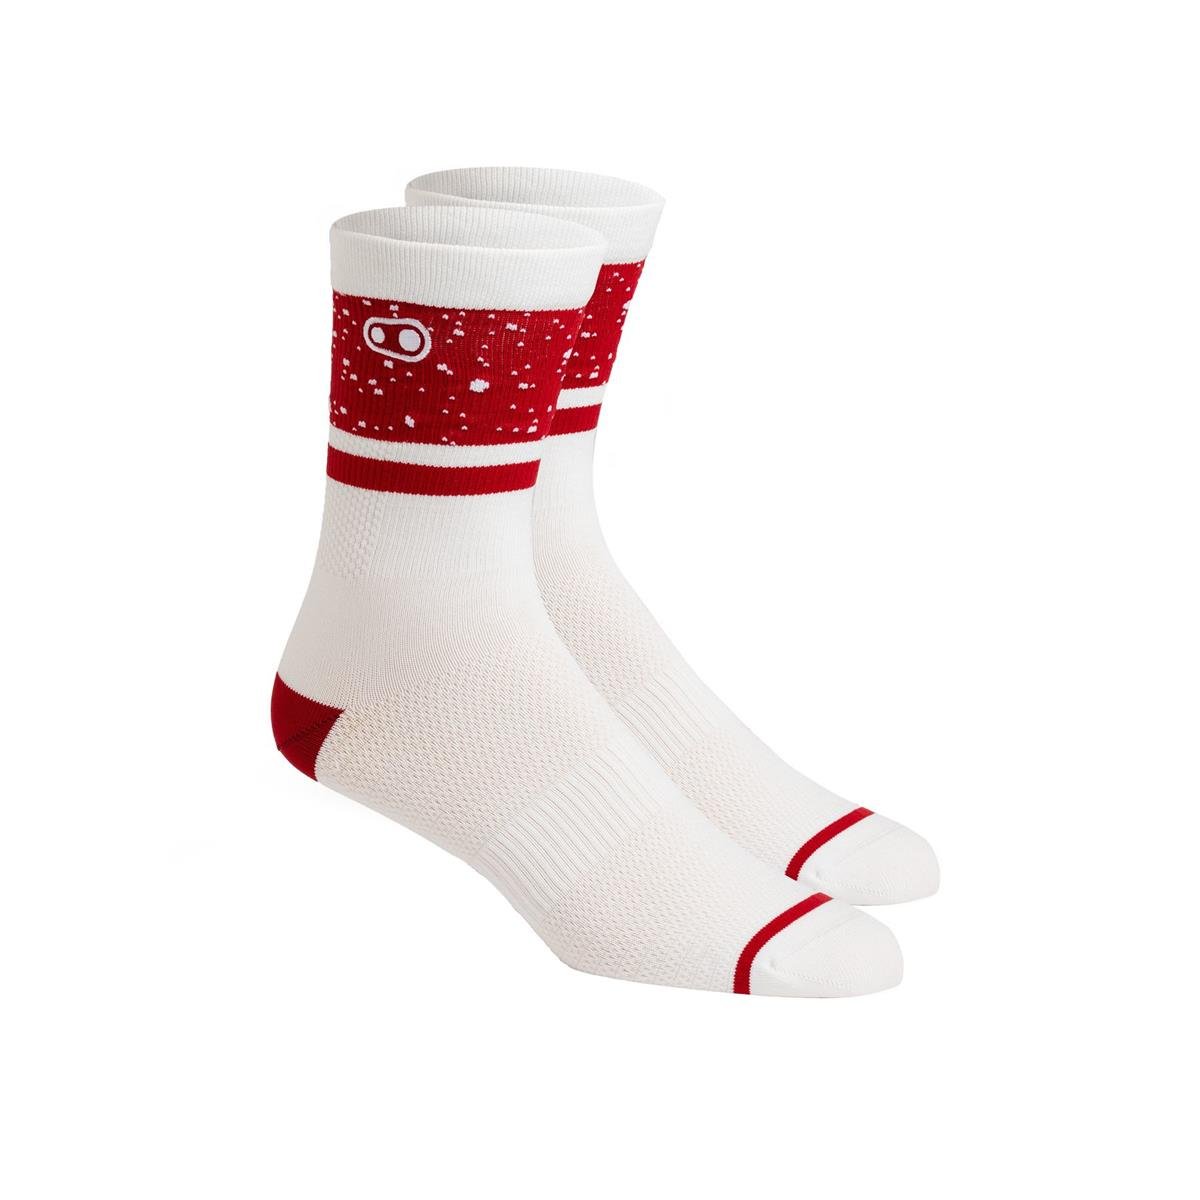 Crankbrothers Socks Icon - Splatter Limited Edition White/Red